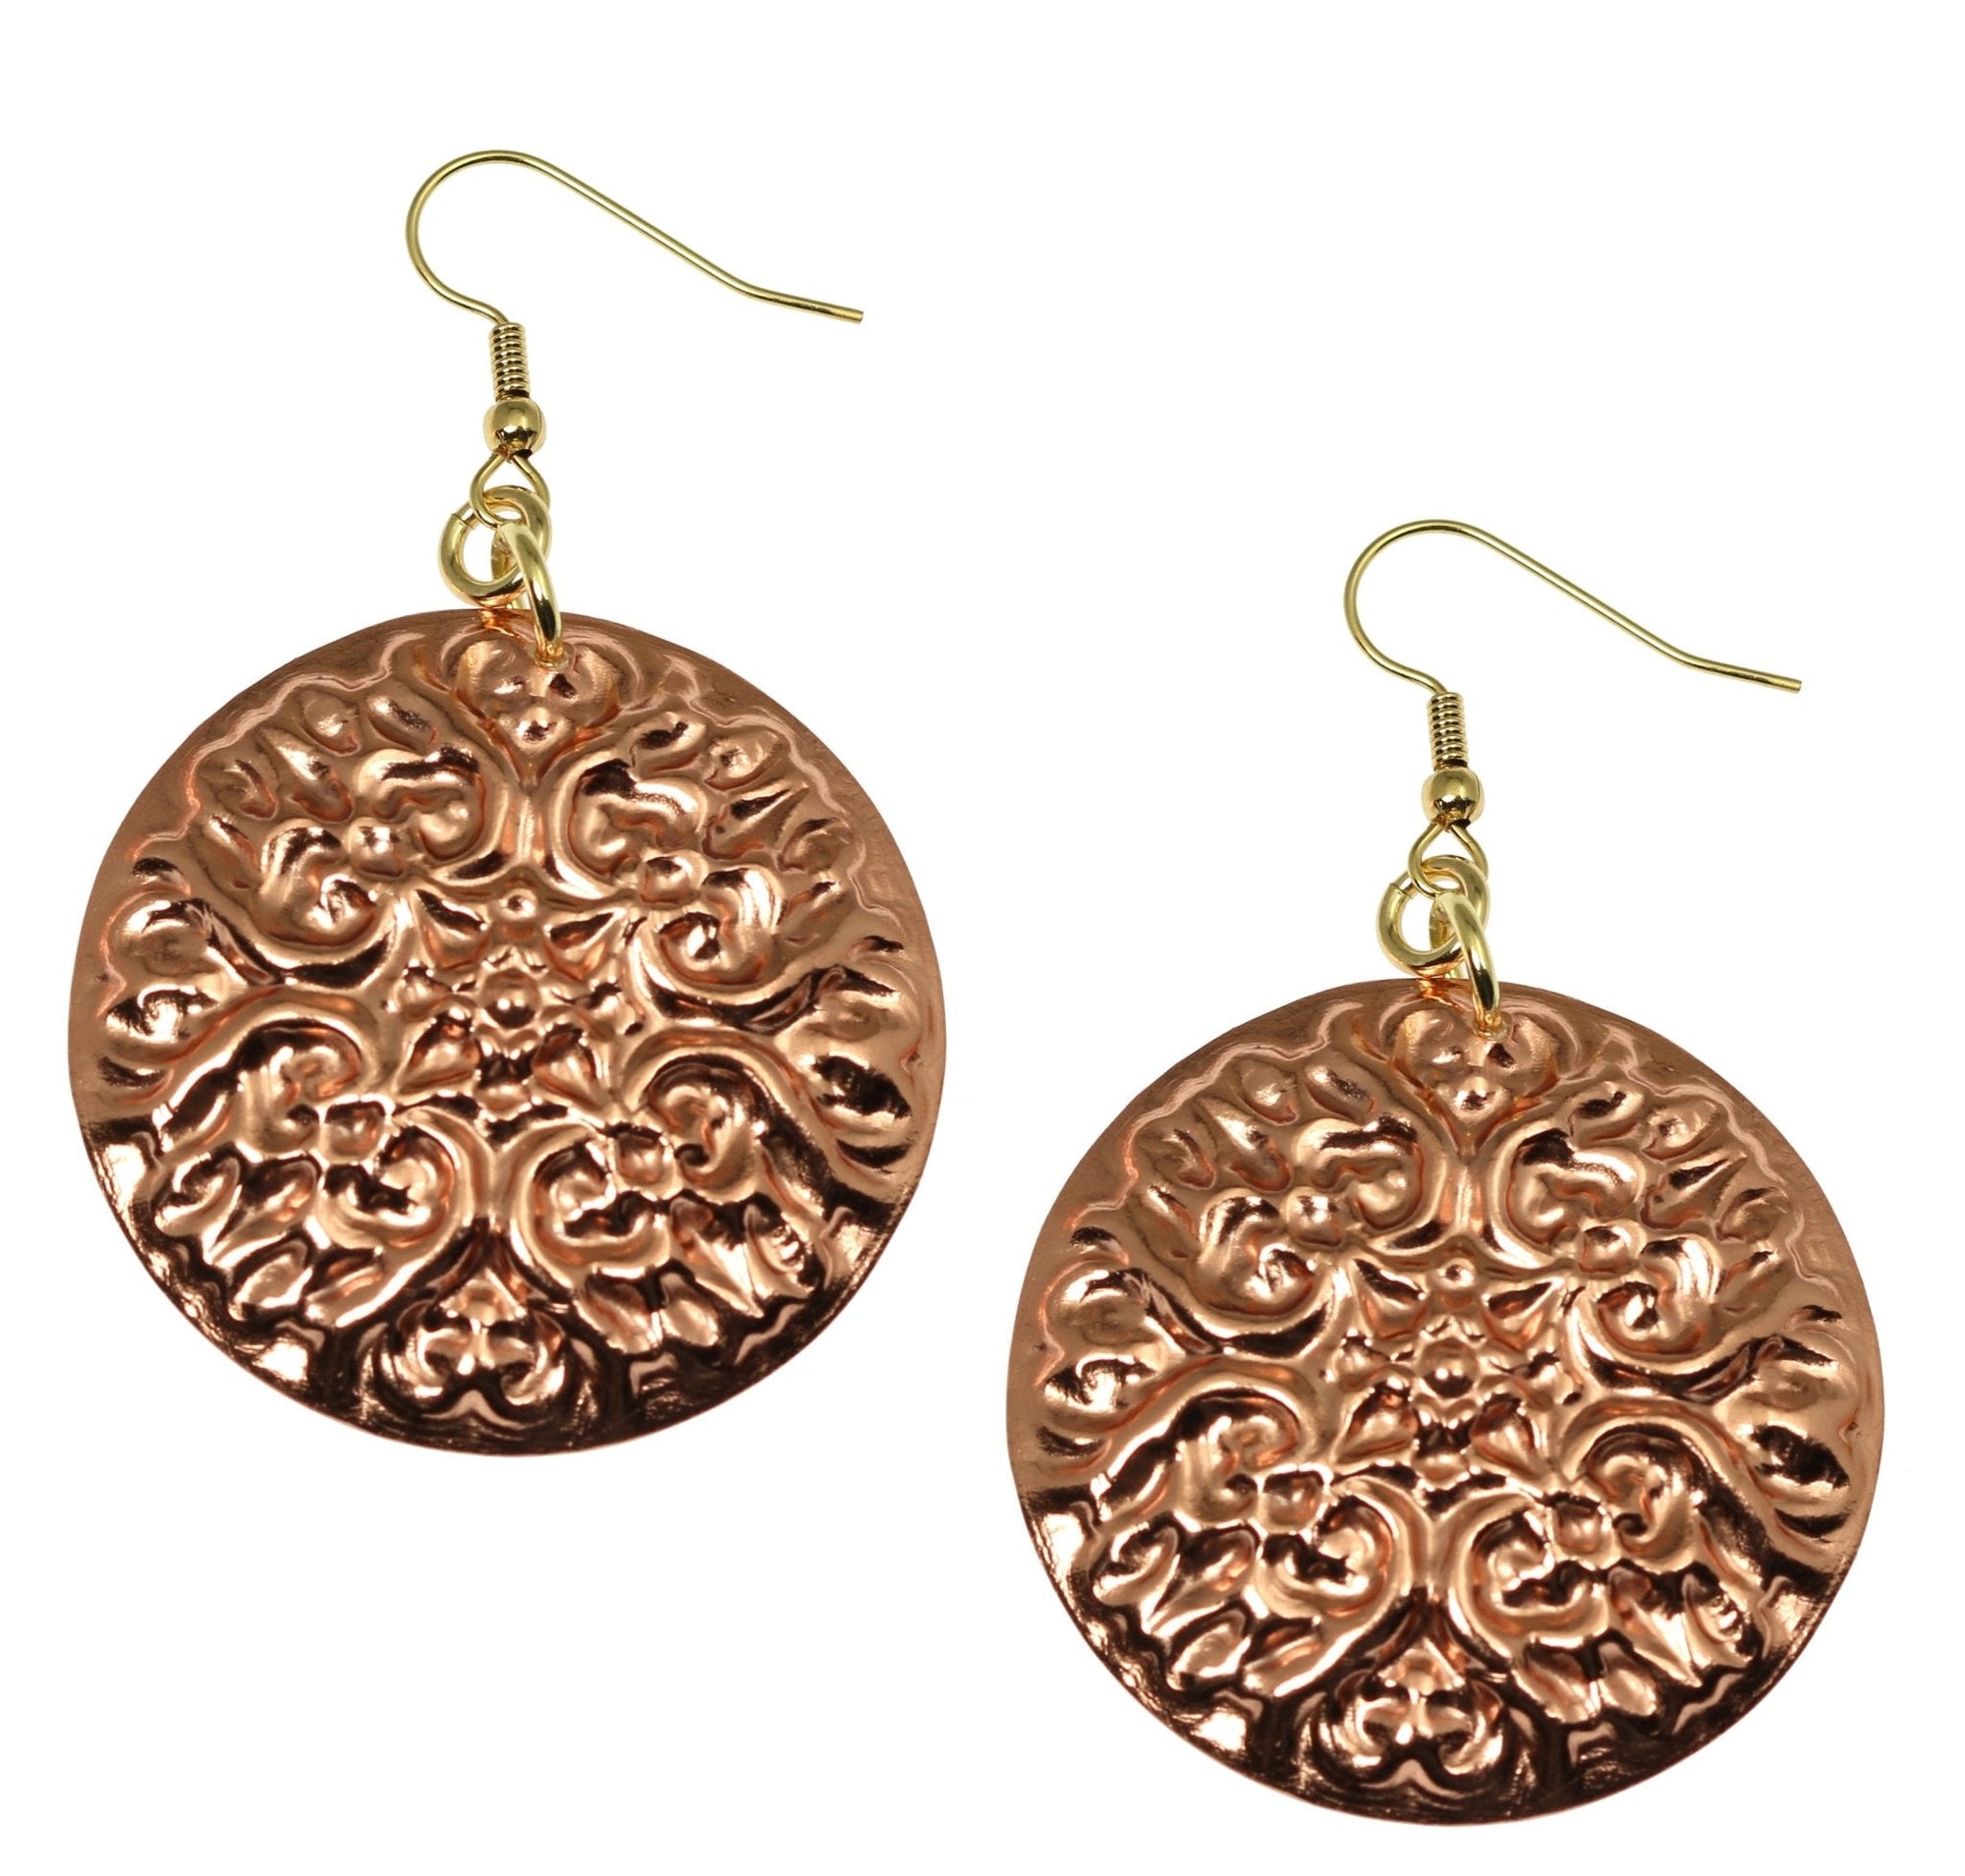 Nob Hill Victorian Earrings Collection